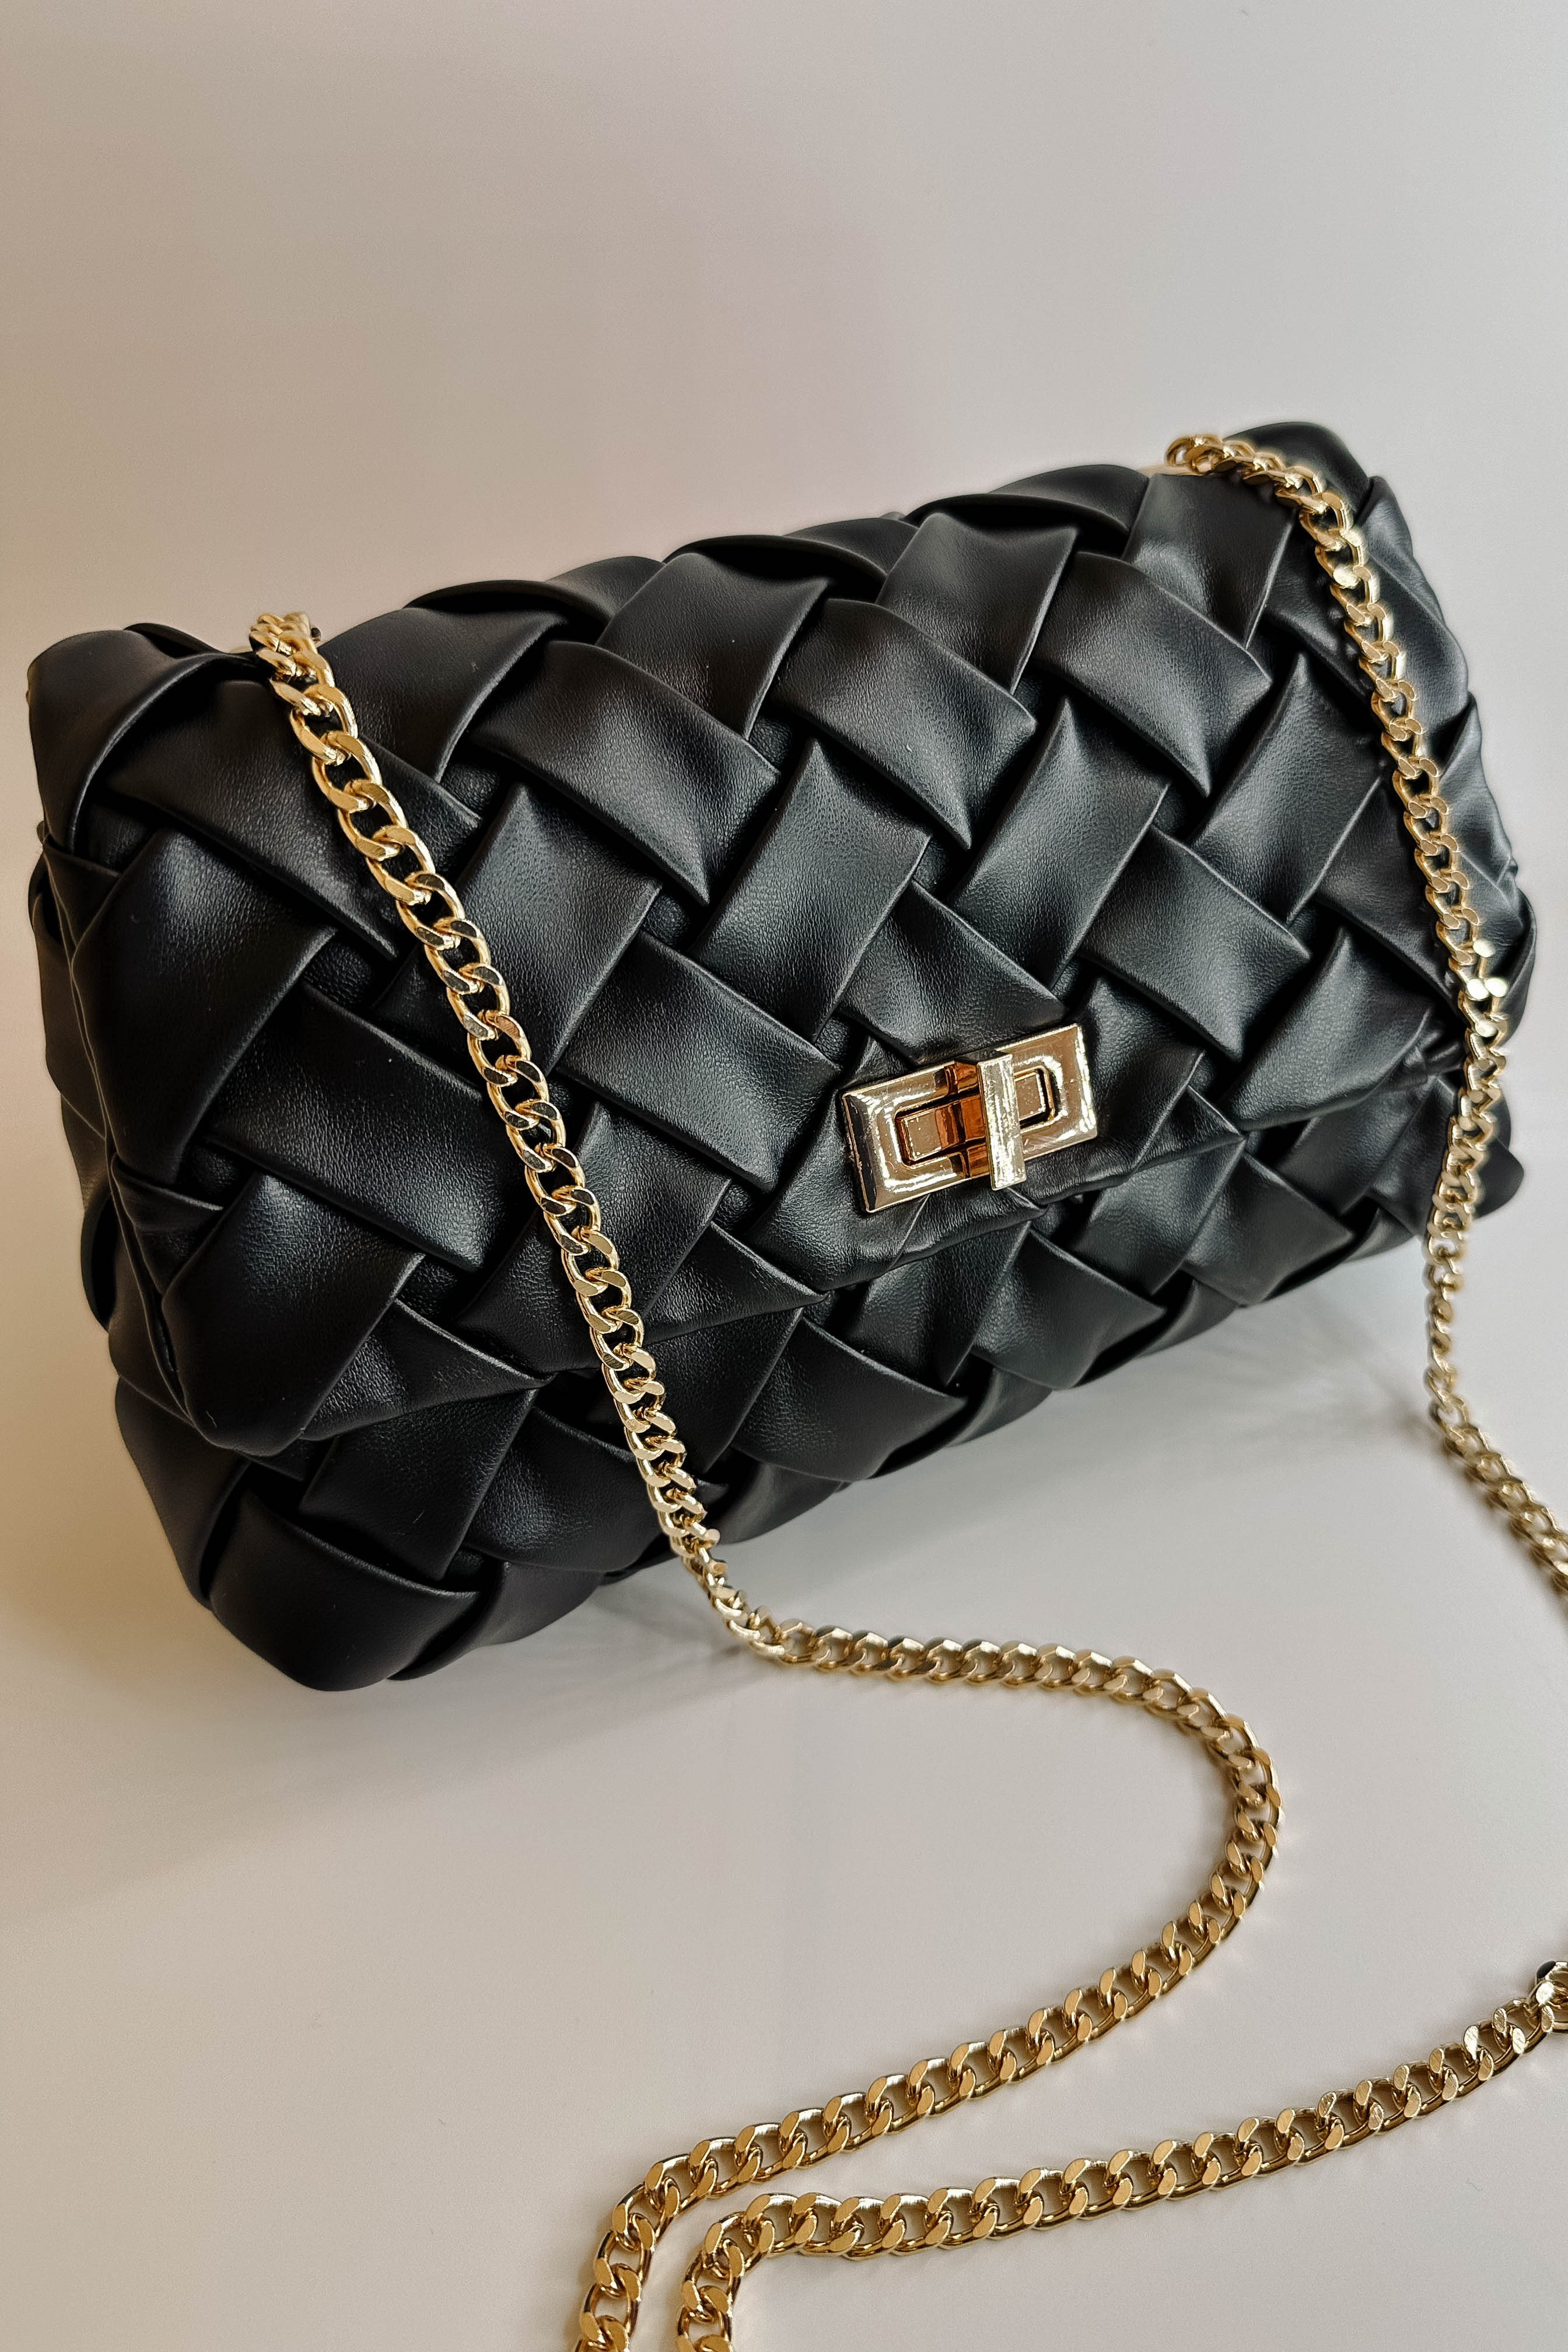 Front view of the Carrie Black Leather Woven Purse which features black woven leather fabric, gold button closure and gold chain link strap.